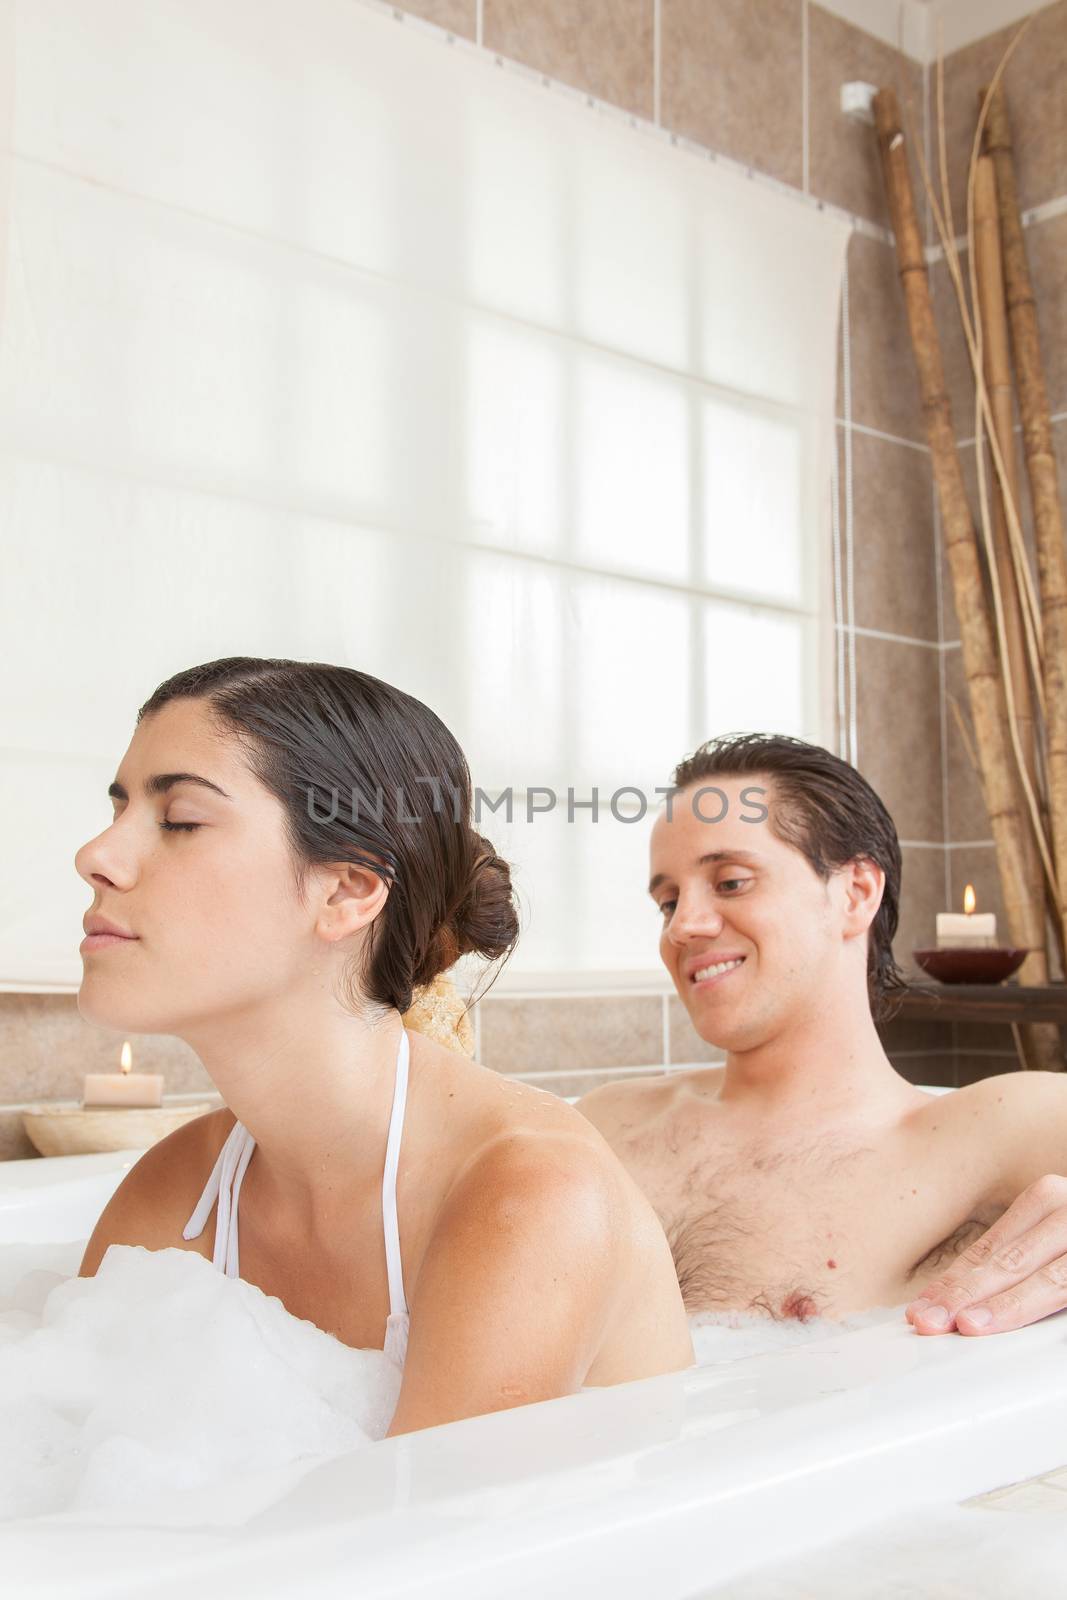 Man soaping his wife